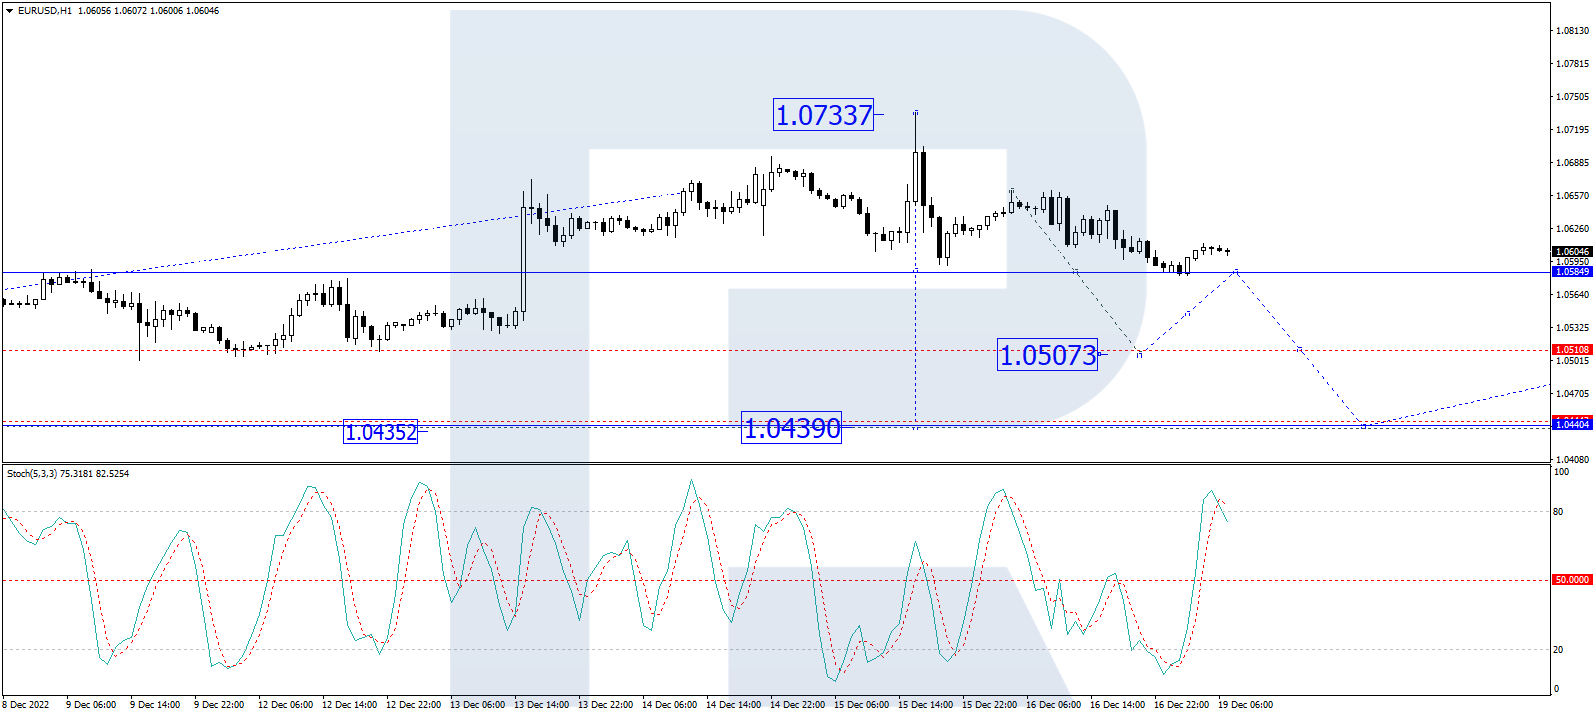 On H1, the pair has formed a structure of decline to 1.0585